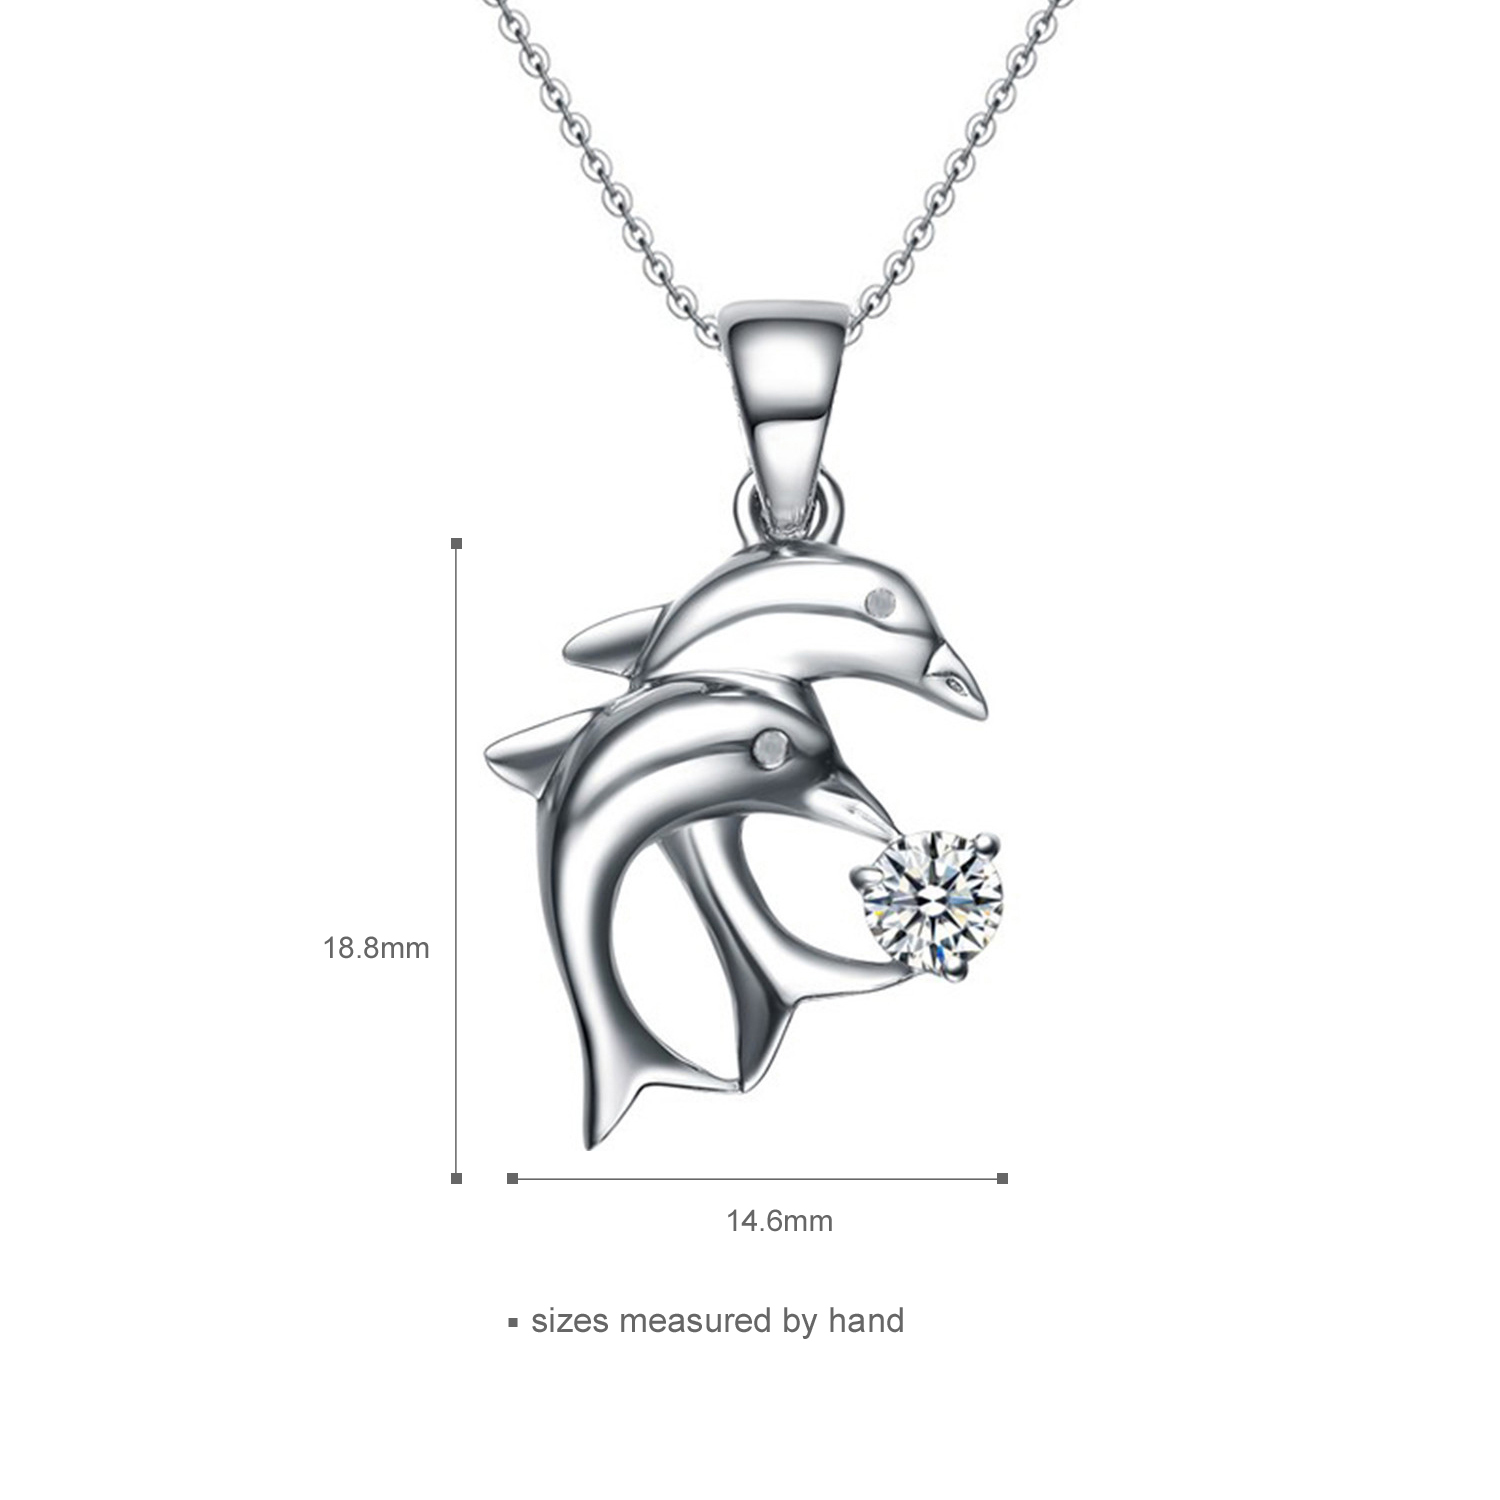 Customize Fashion 925 Silver Two Dolphins Pendant Necklace Cross Chain Necklaces for women gift(图2)